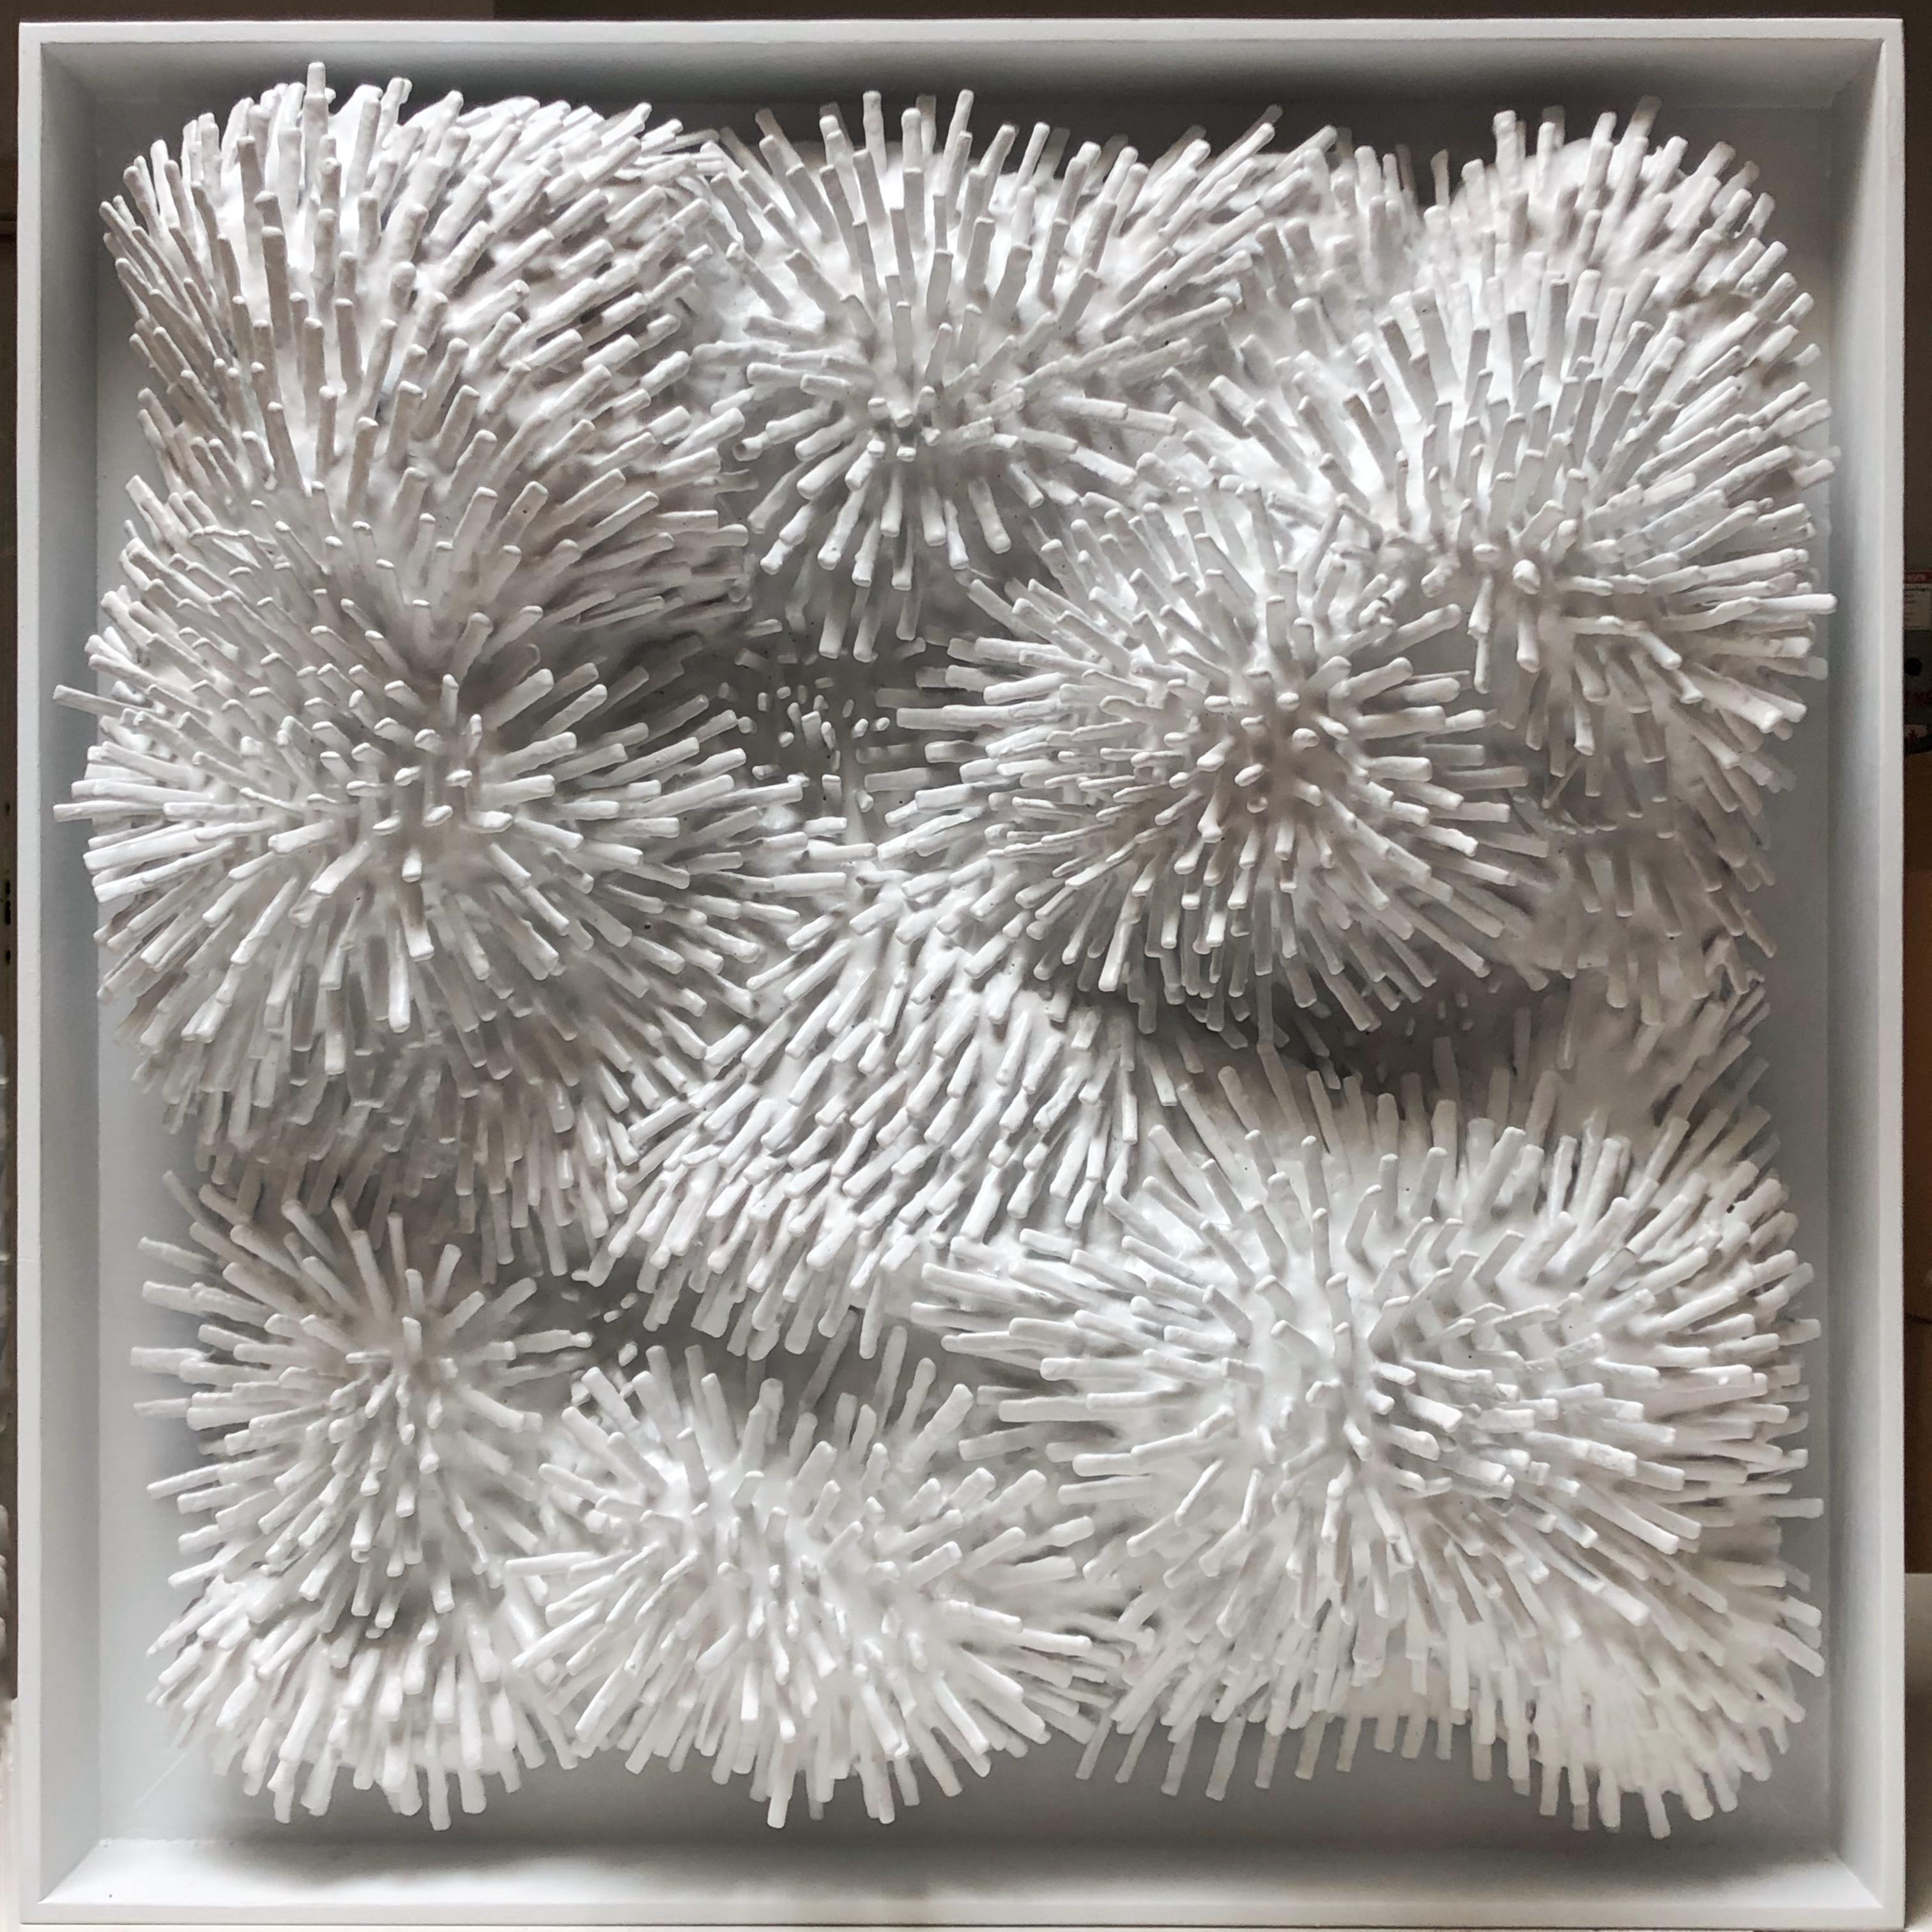 White Burst 2 - 3D organic feel contemporary abstract mural sculpture in foam - Mixed Media Art by Erin Vincent